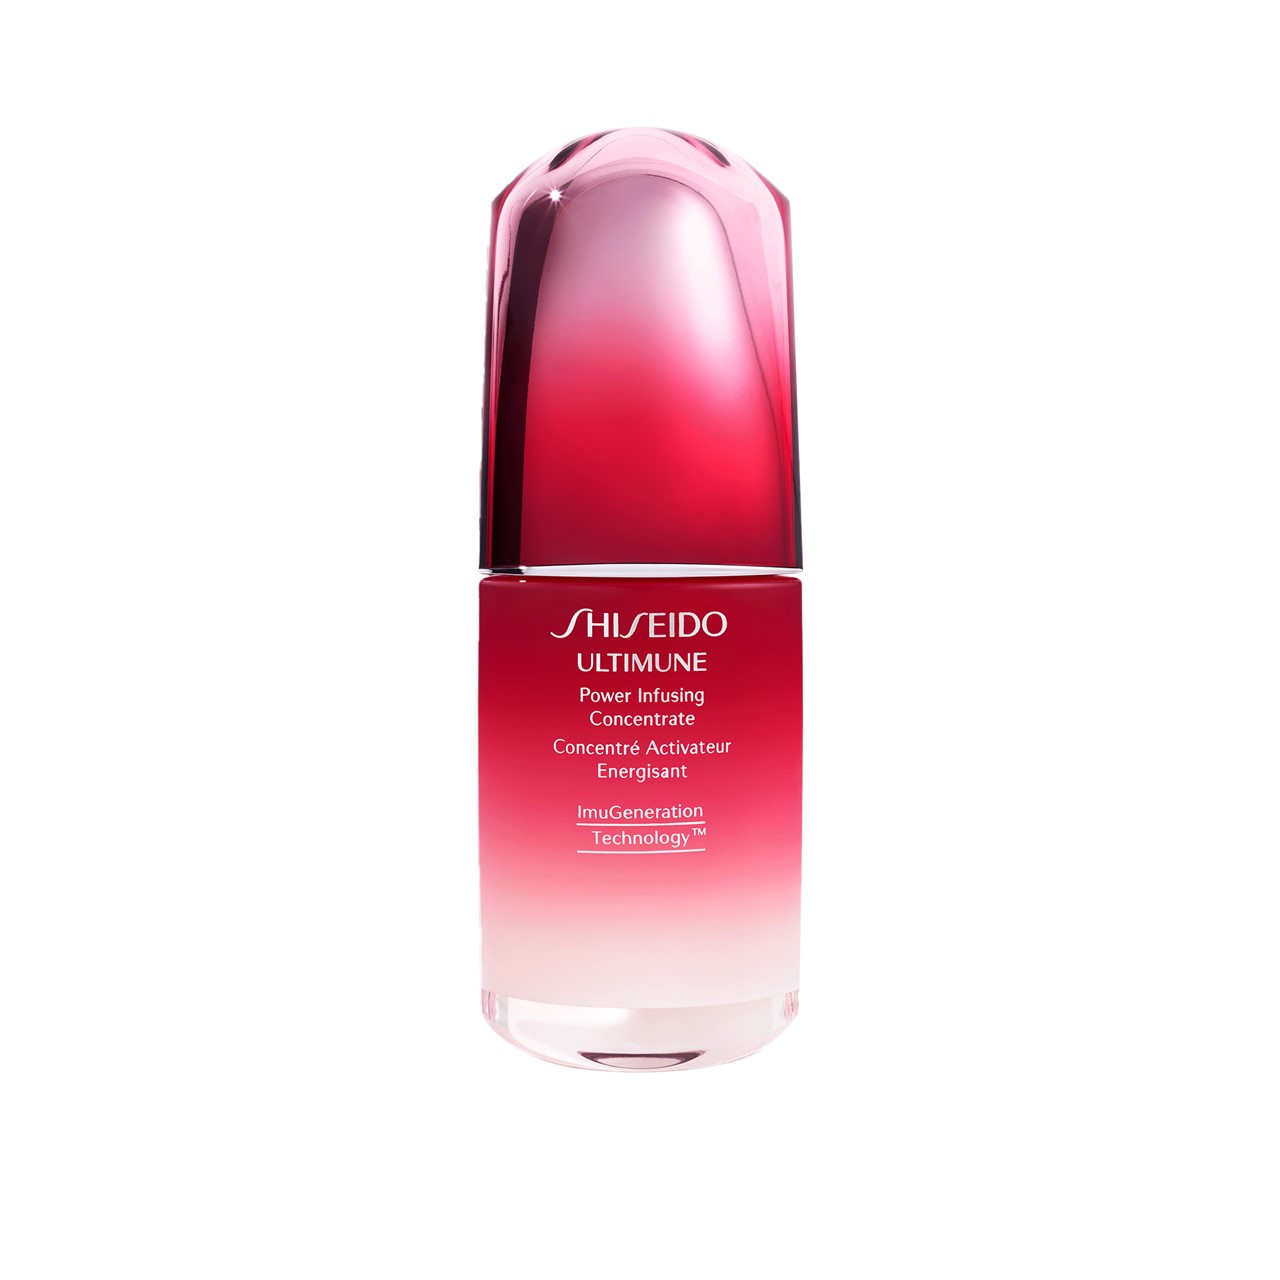 Shiseido Ultimune Power Infusing Concentrate 75ml (2.54fl oz)